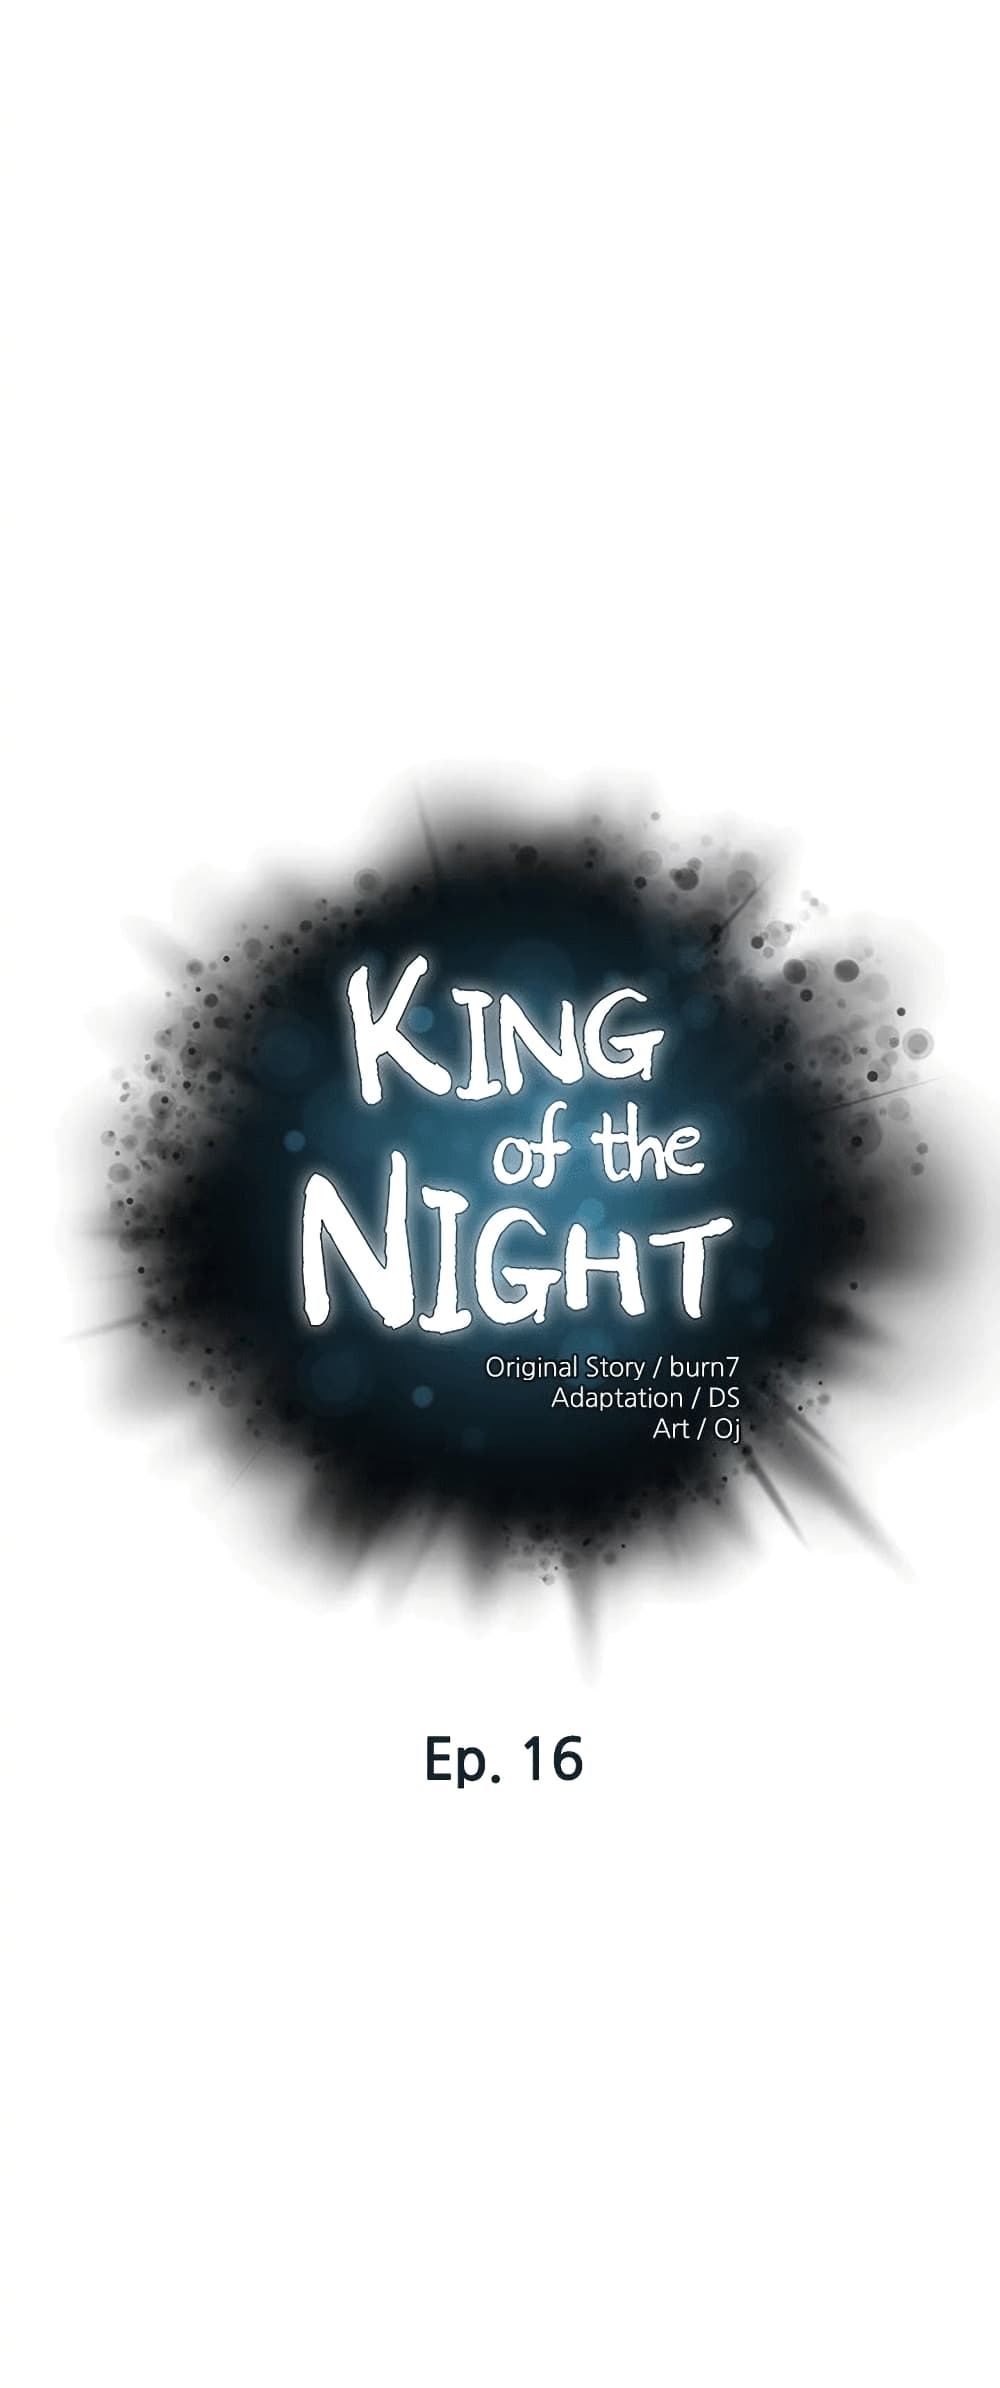 King of the Night 16 01